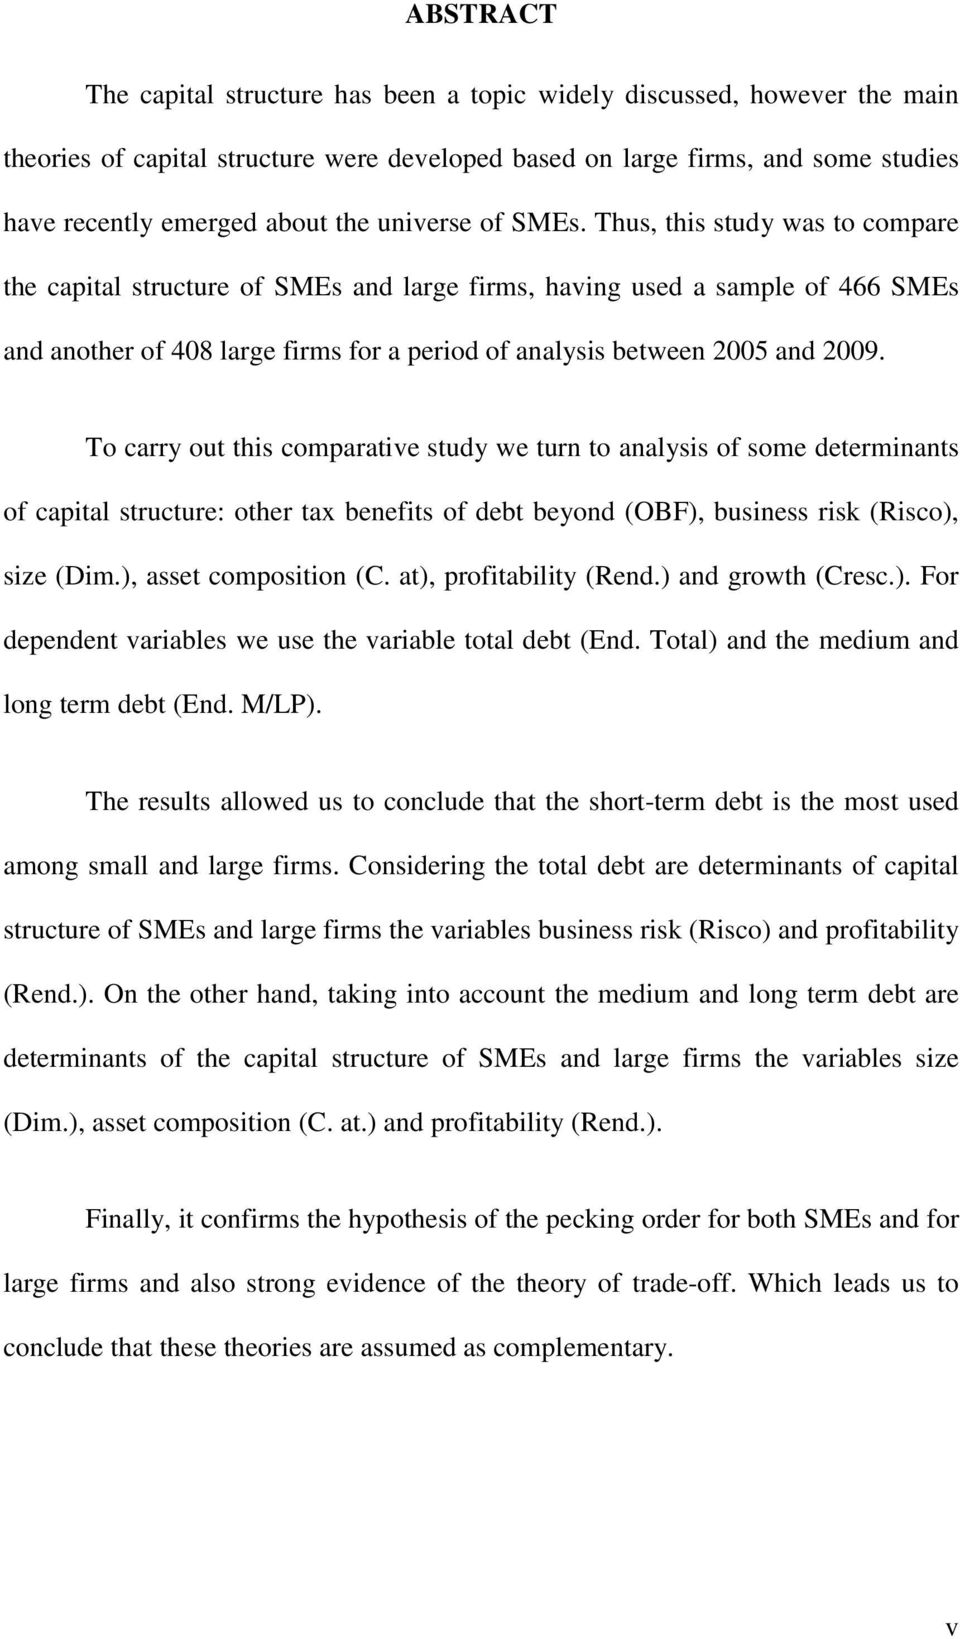 Thus, this study was to compare the capital structure of SMEs and large firms, having used a sample of 466 SMEs and another of 408 large firms for a period of analysis between 2005 and 2009.